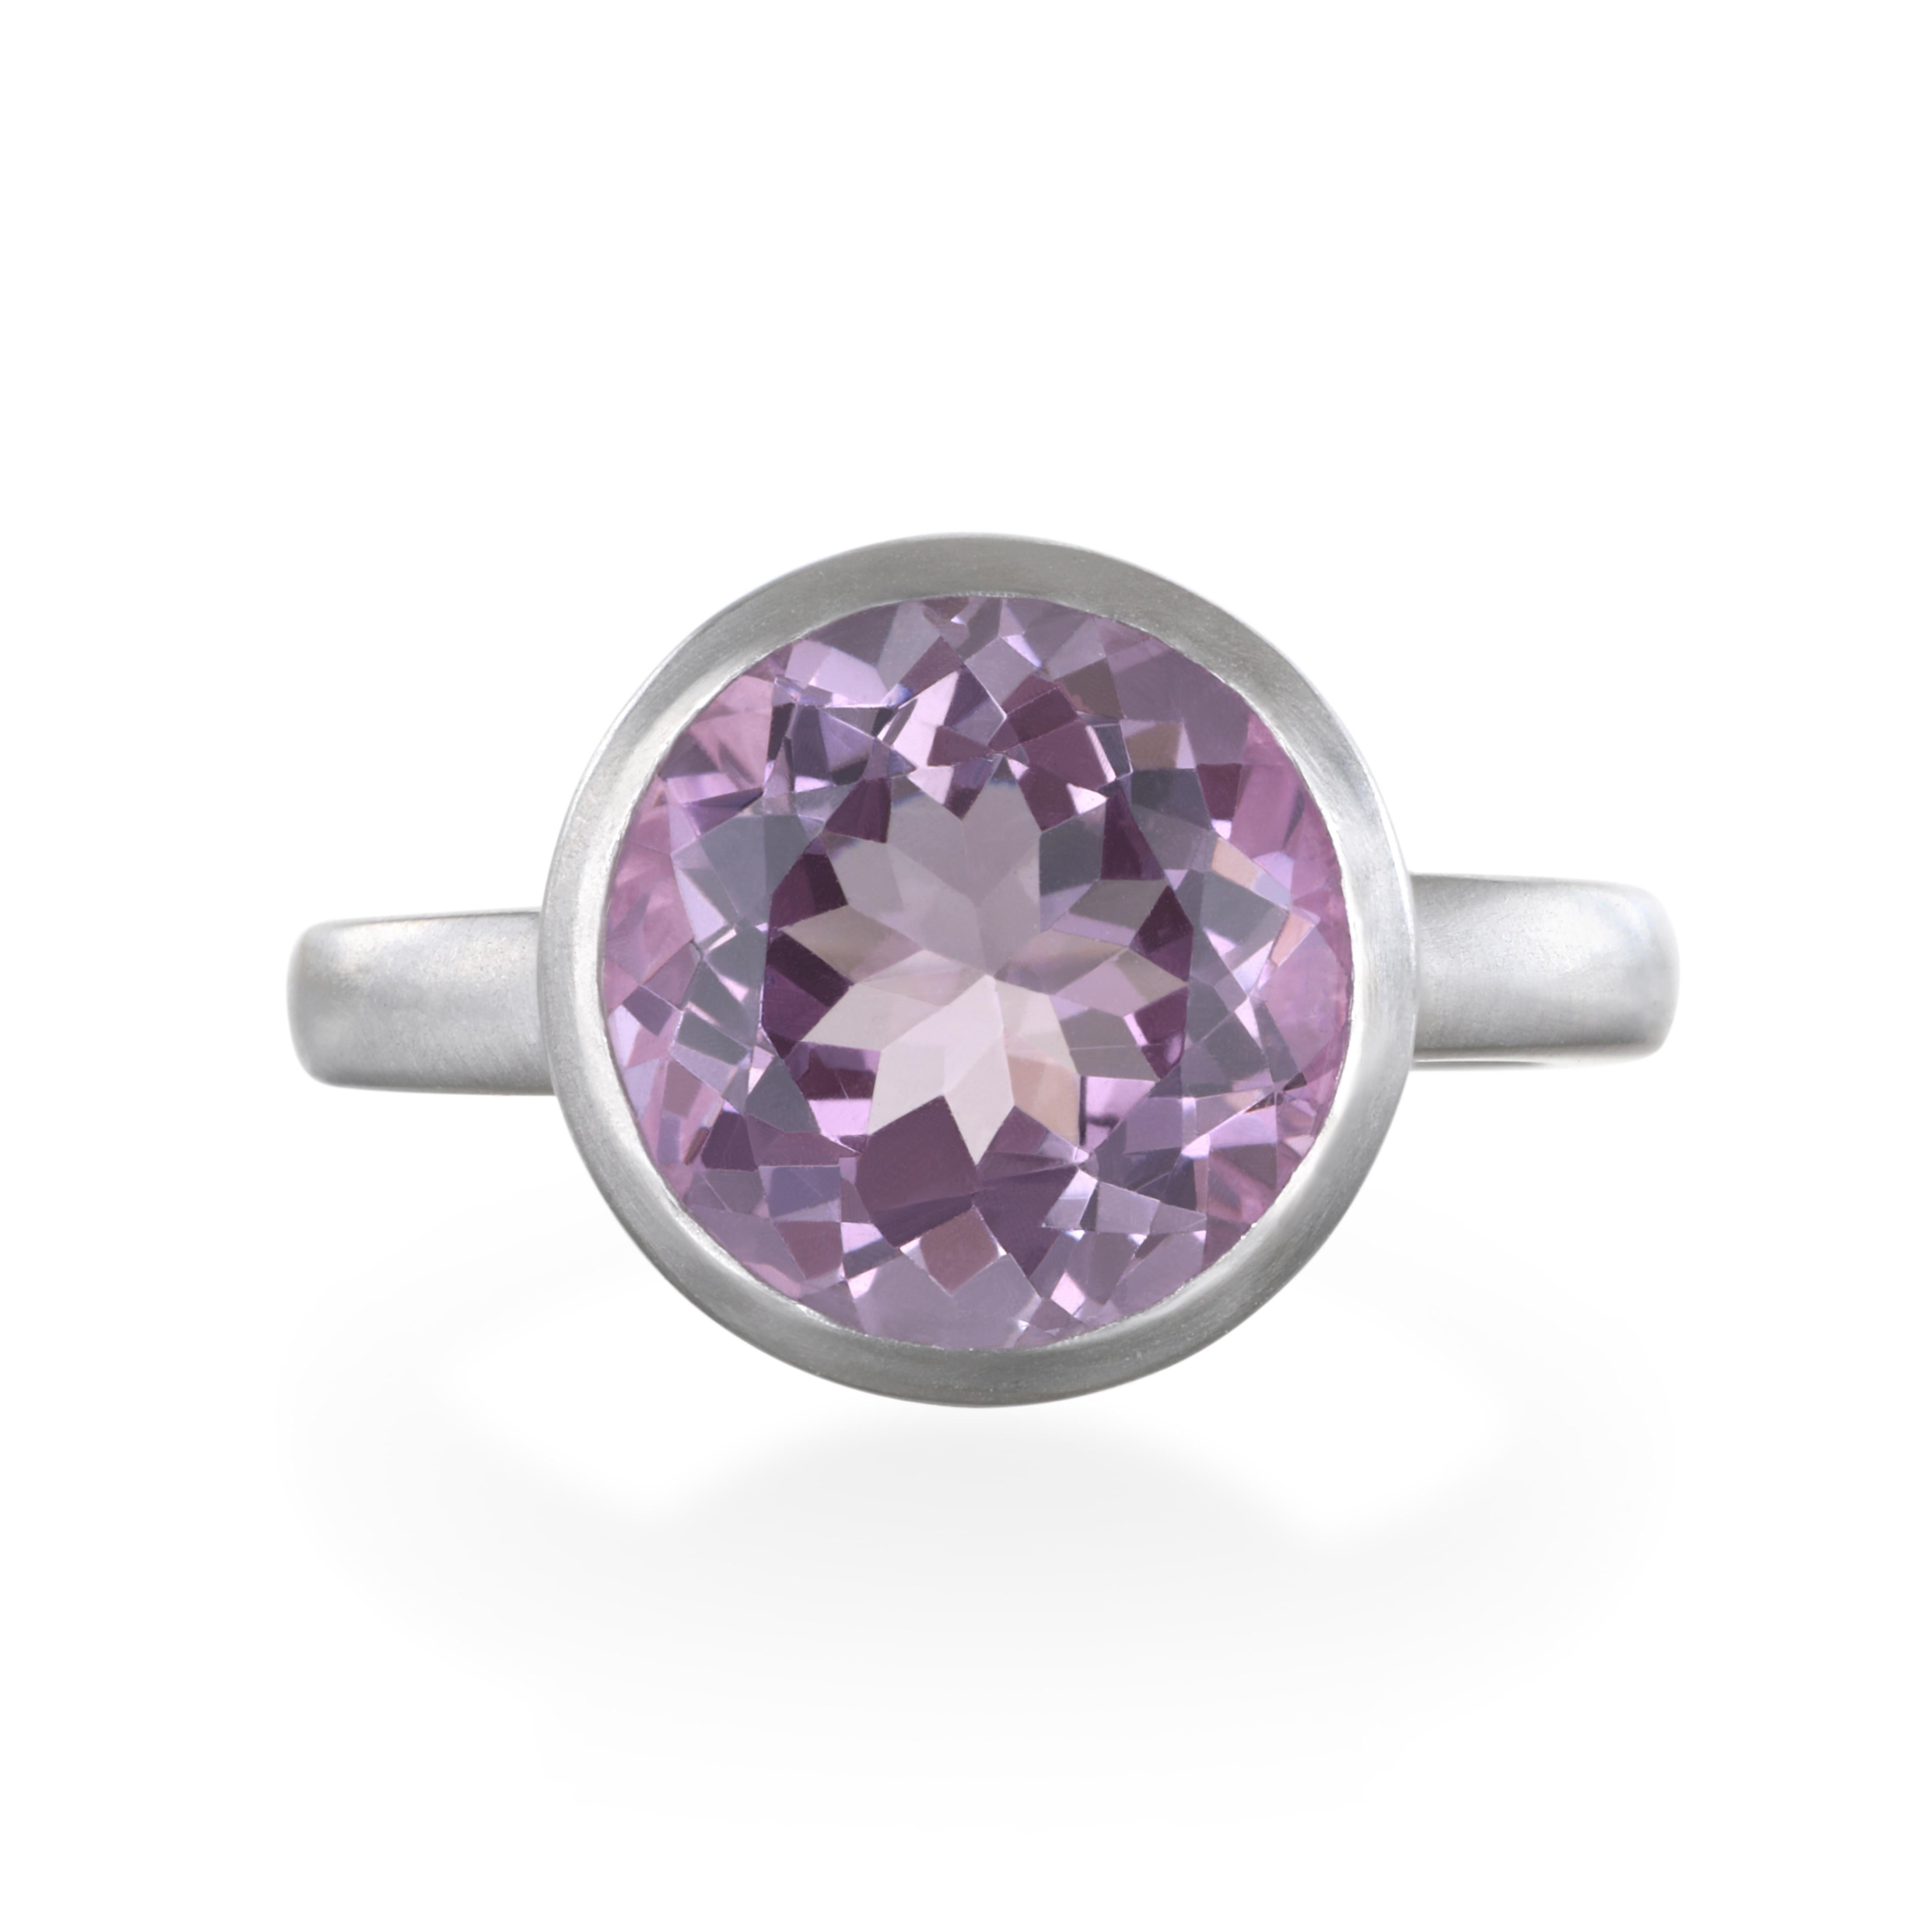 Beautiful Purple Scapolite in a matte platinum setting.
Scapolite gemstones are prized for their color, particularly when they are pink to violet. Today's collectors value the high-quality stones sourced from the Umba River area northeast of